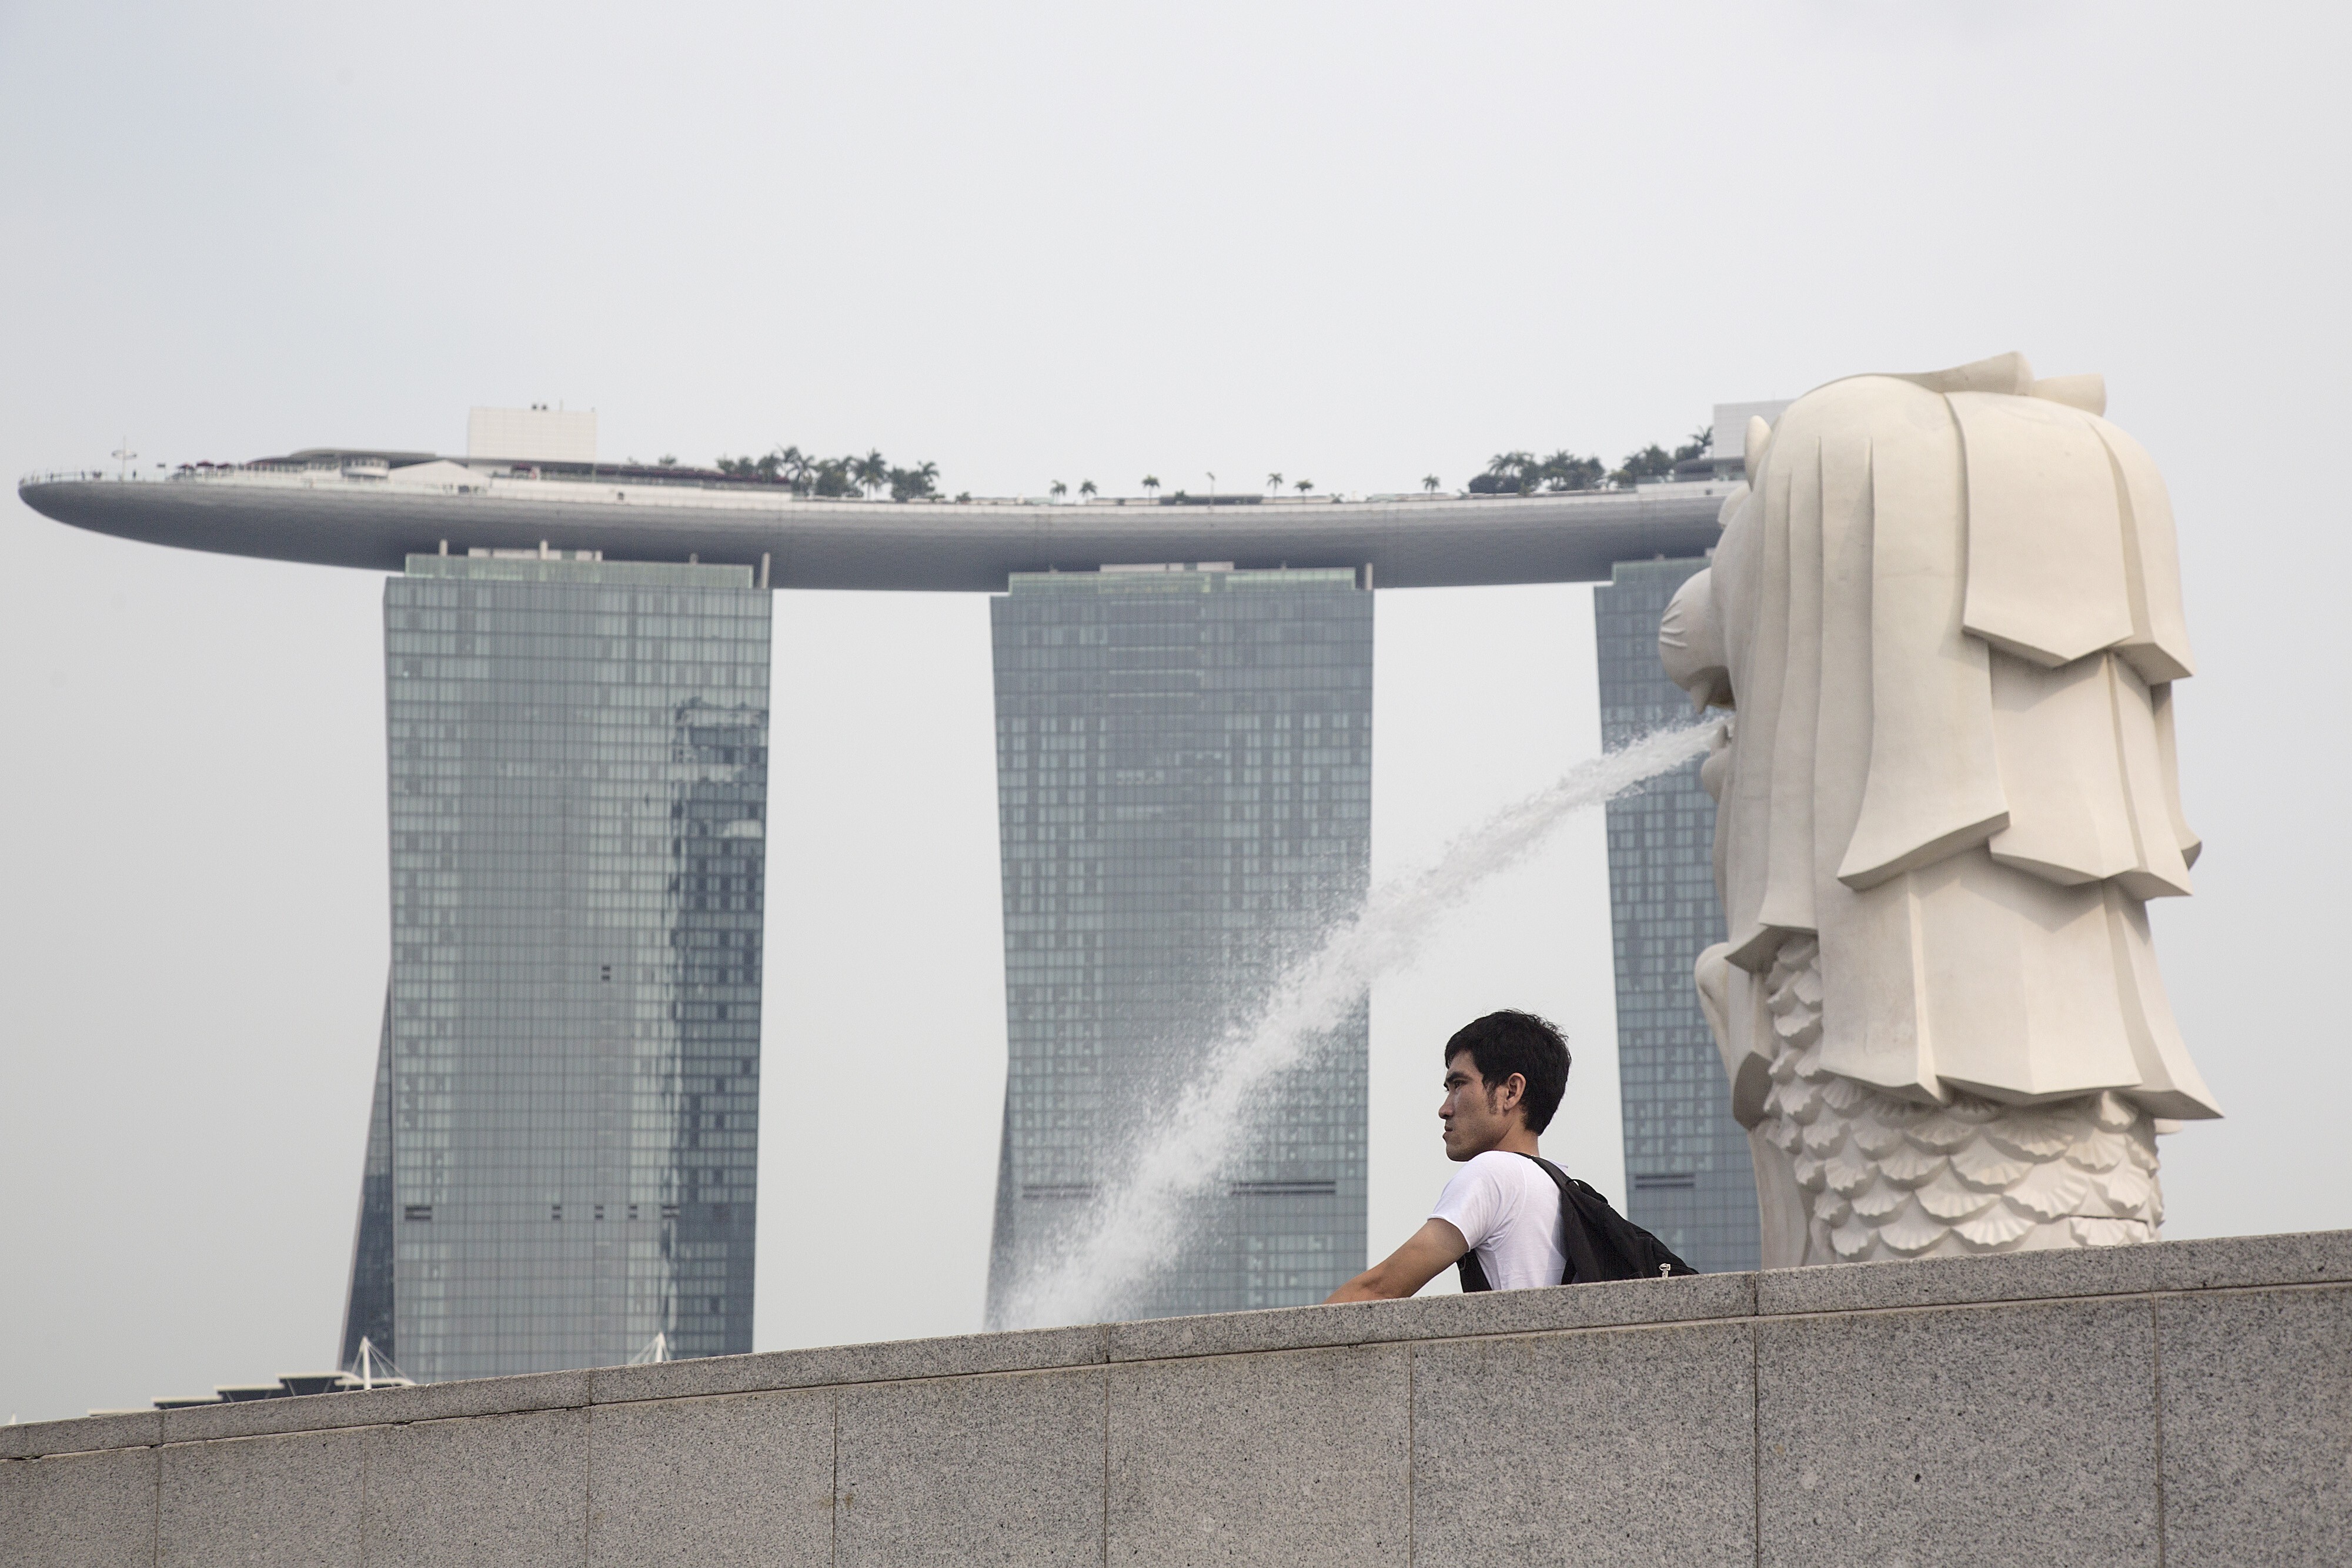 The Merlion statue in Singapore. Photo: Bloomberg